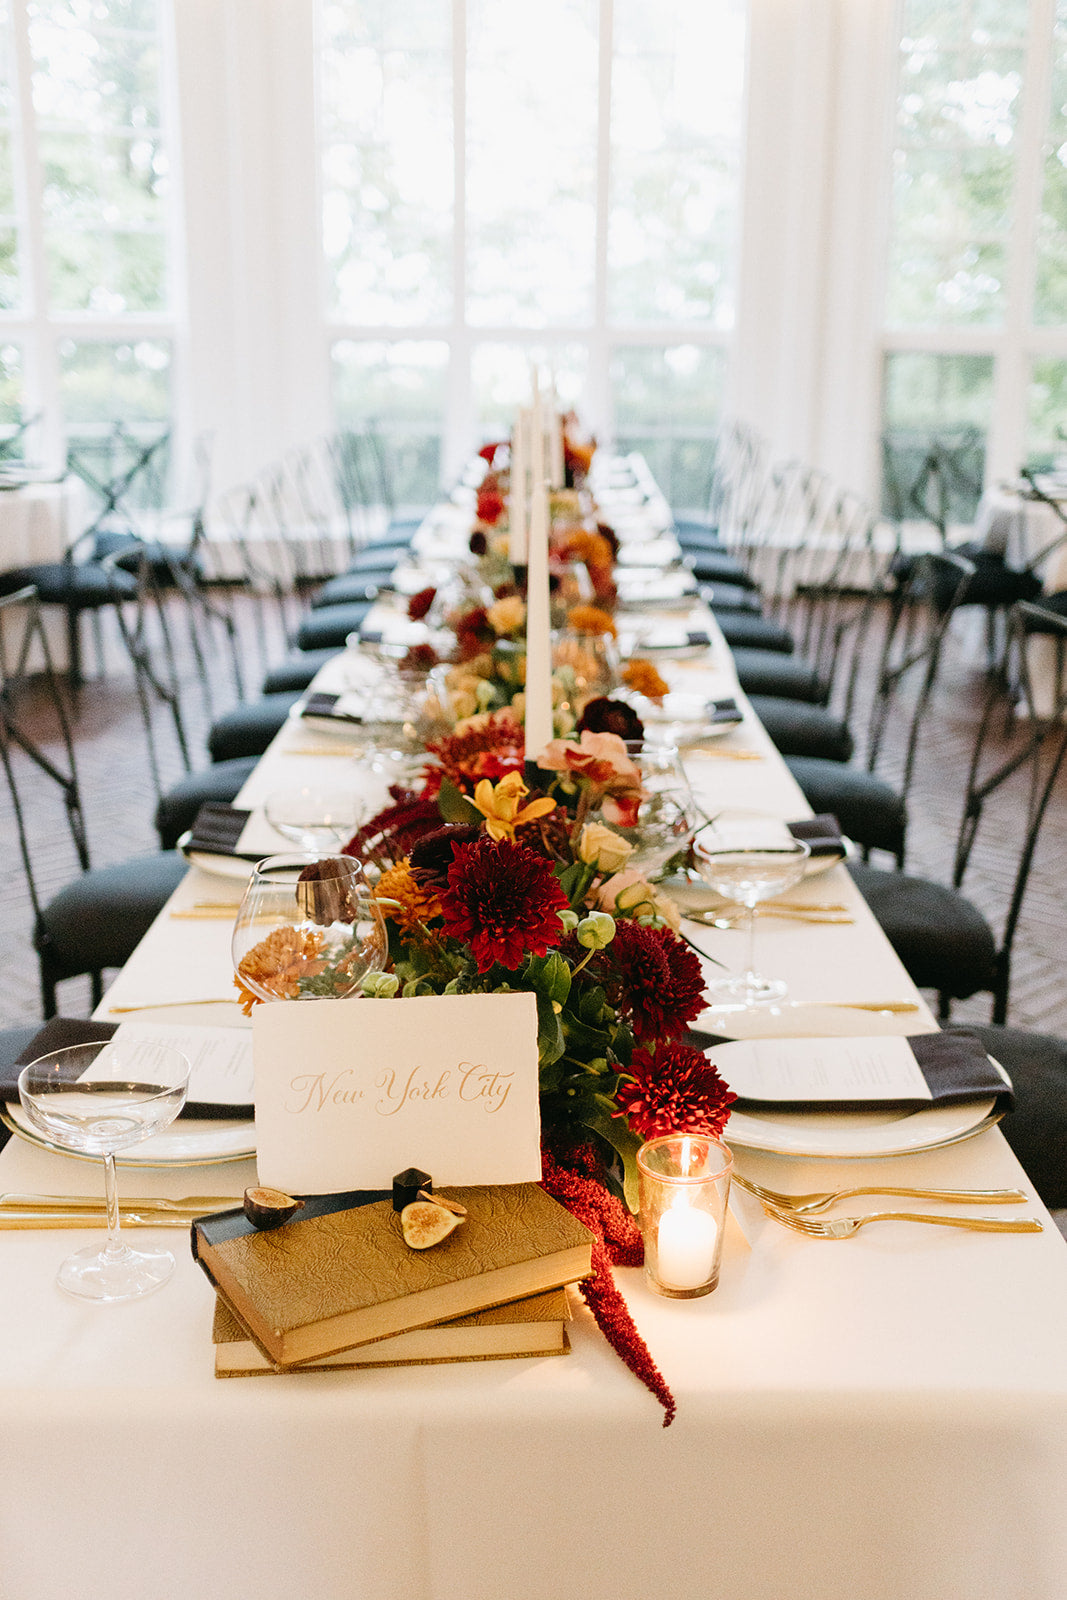 tablescape with dark and moody, vintage inspired theme Boston, MA